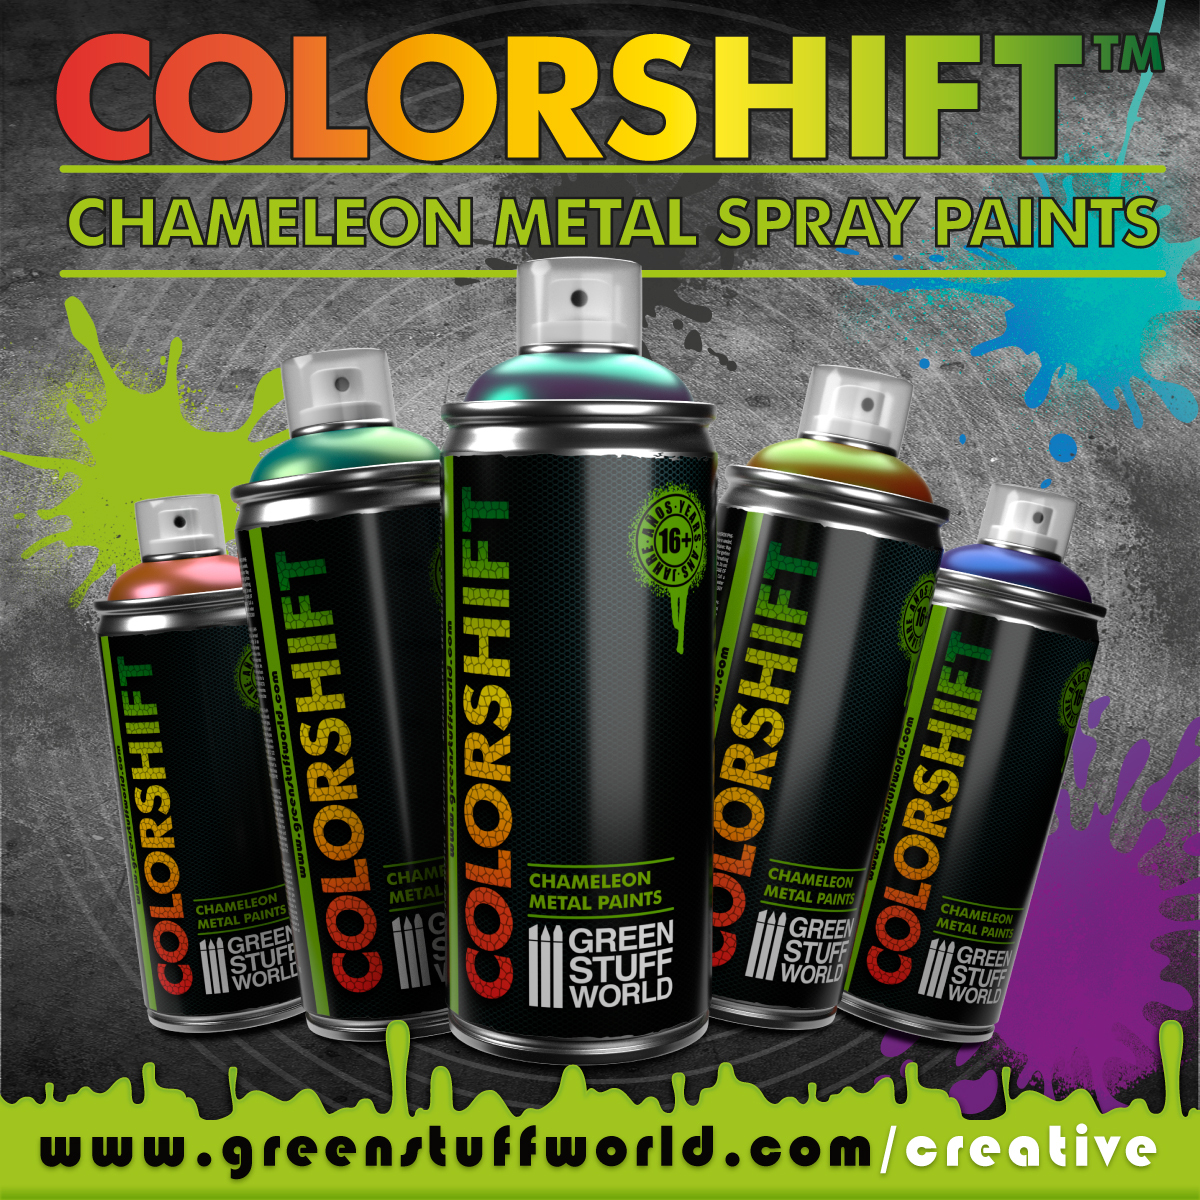 Any idea where I can get color-shift spray paint the colors of